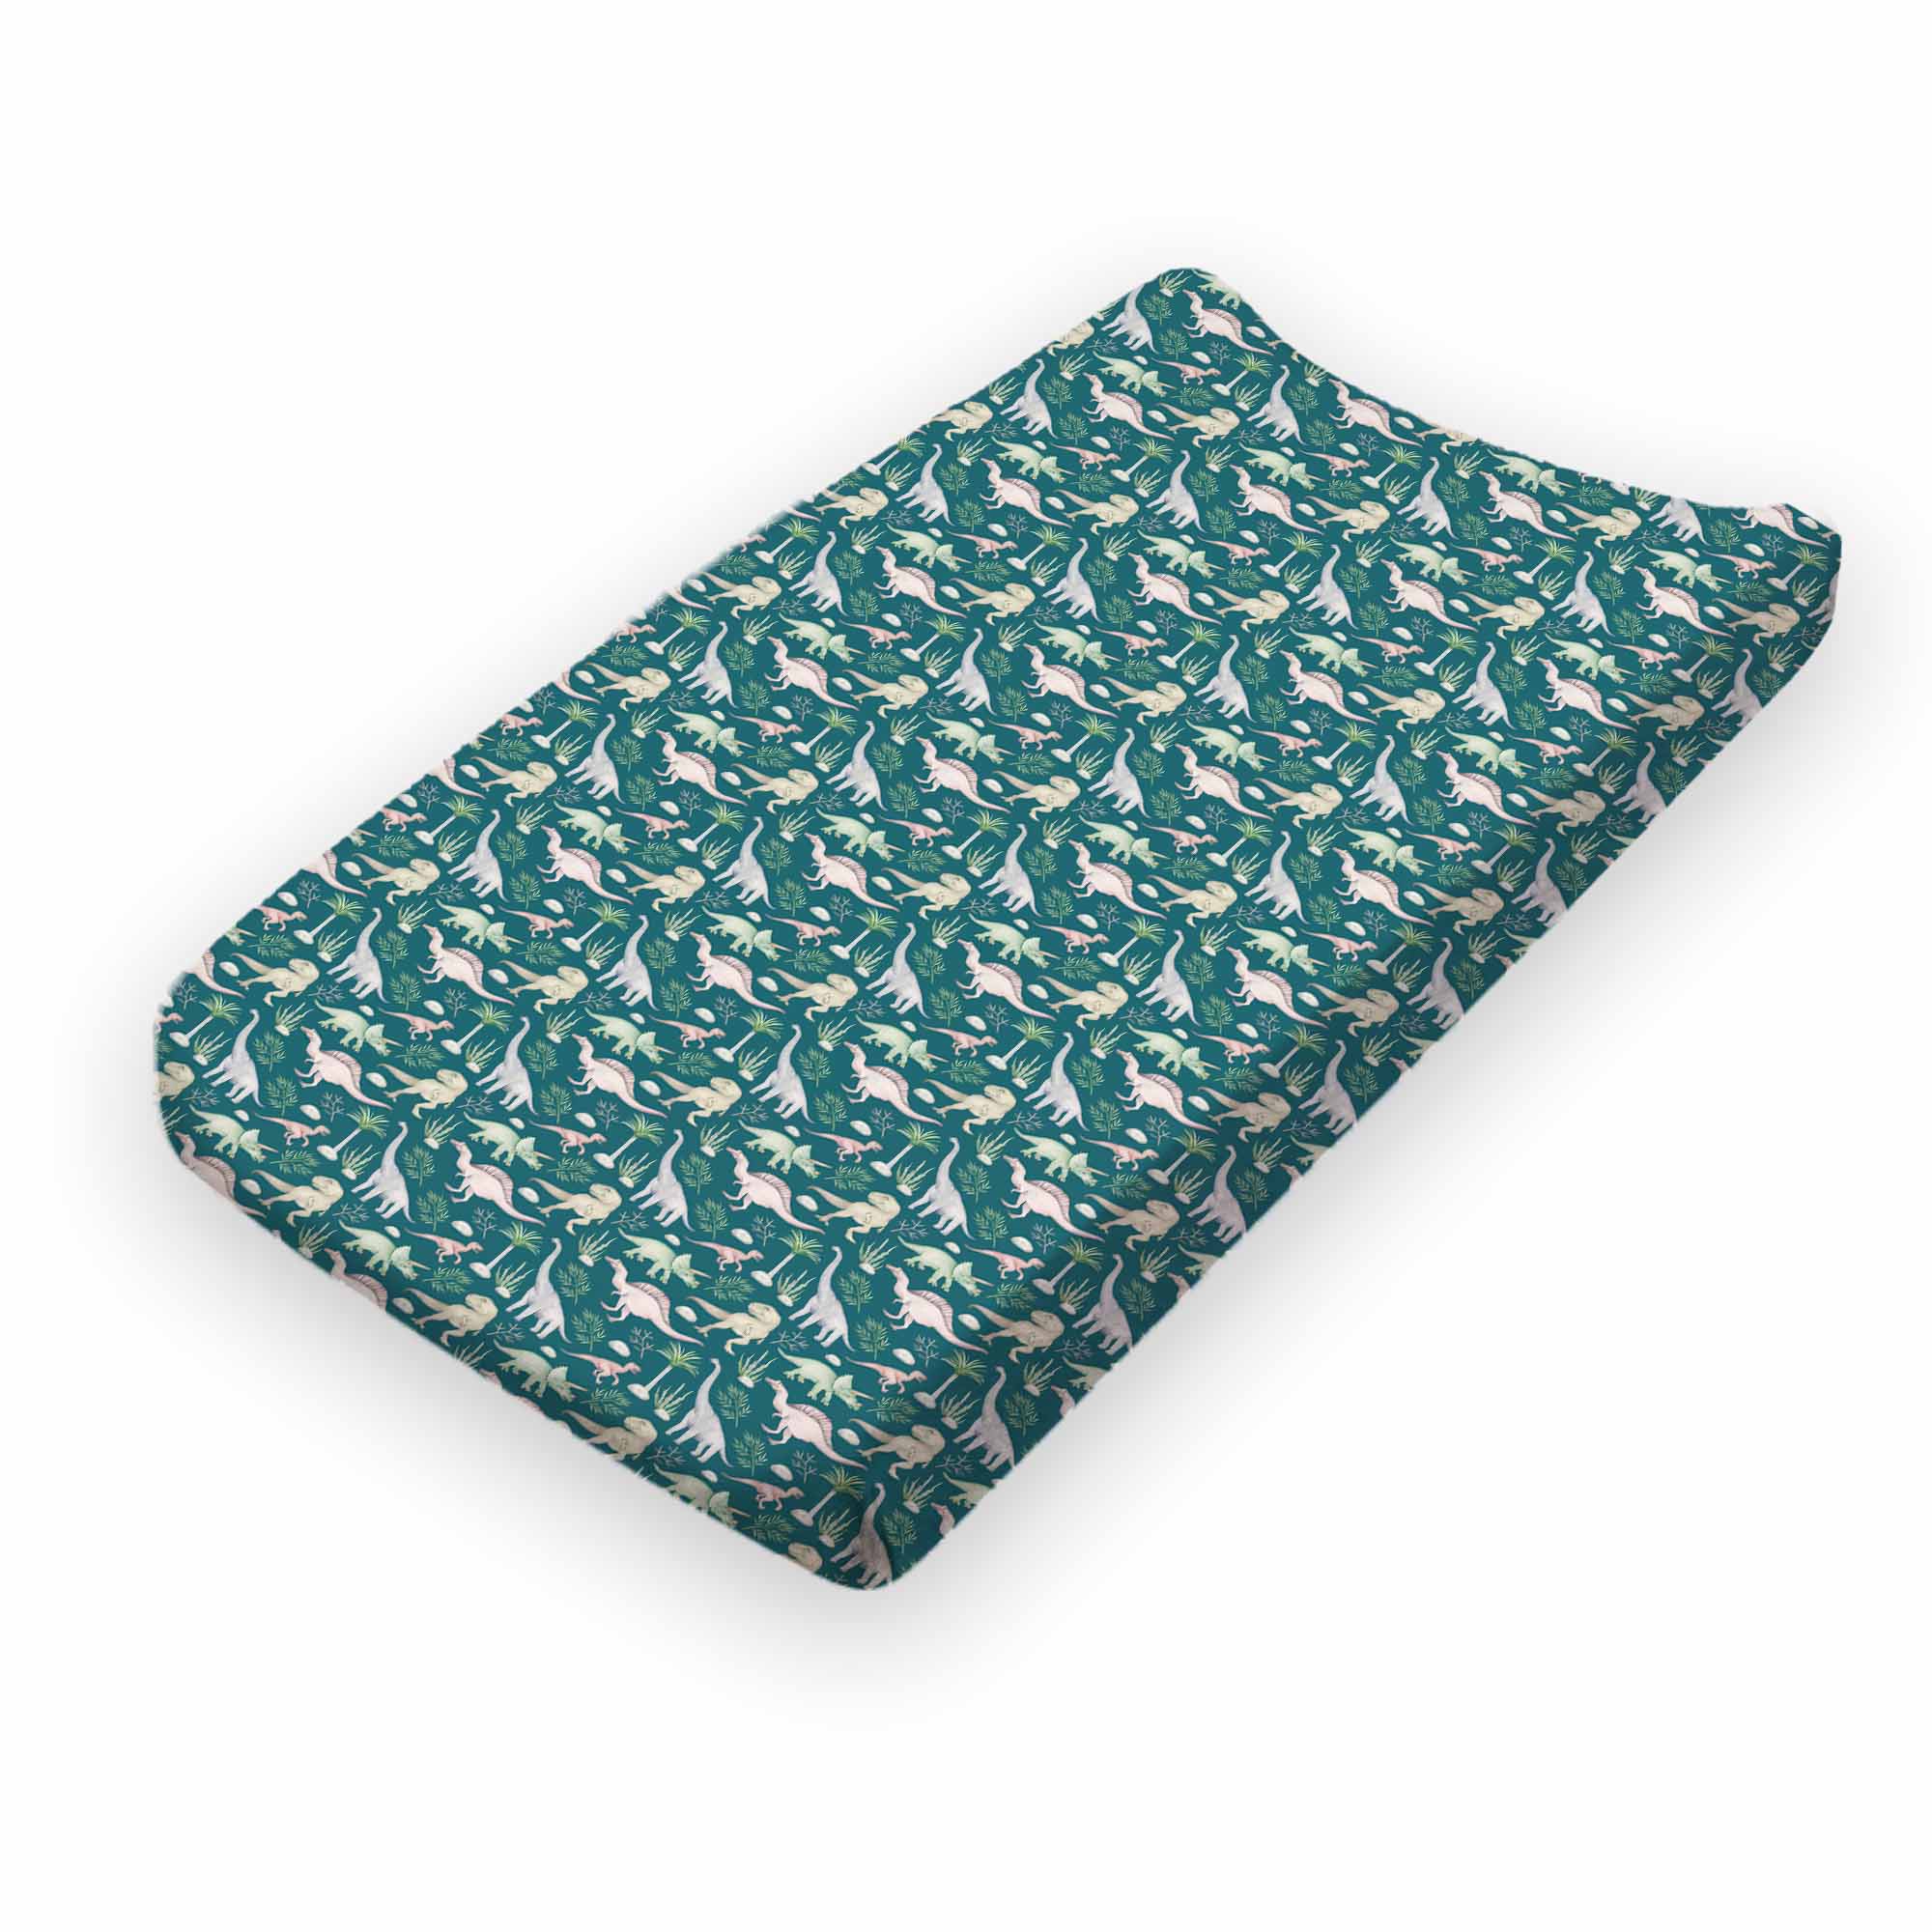 Rex Changing Pad Cover: FINAL SALE